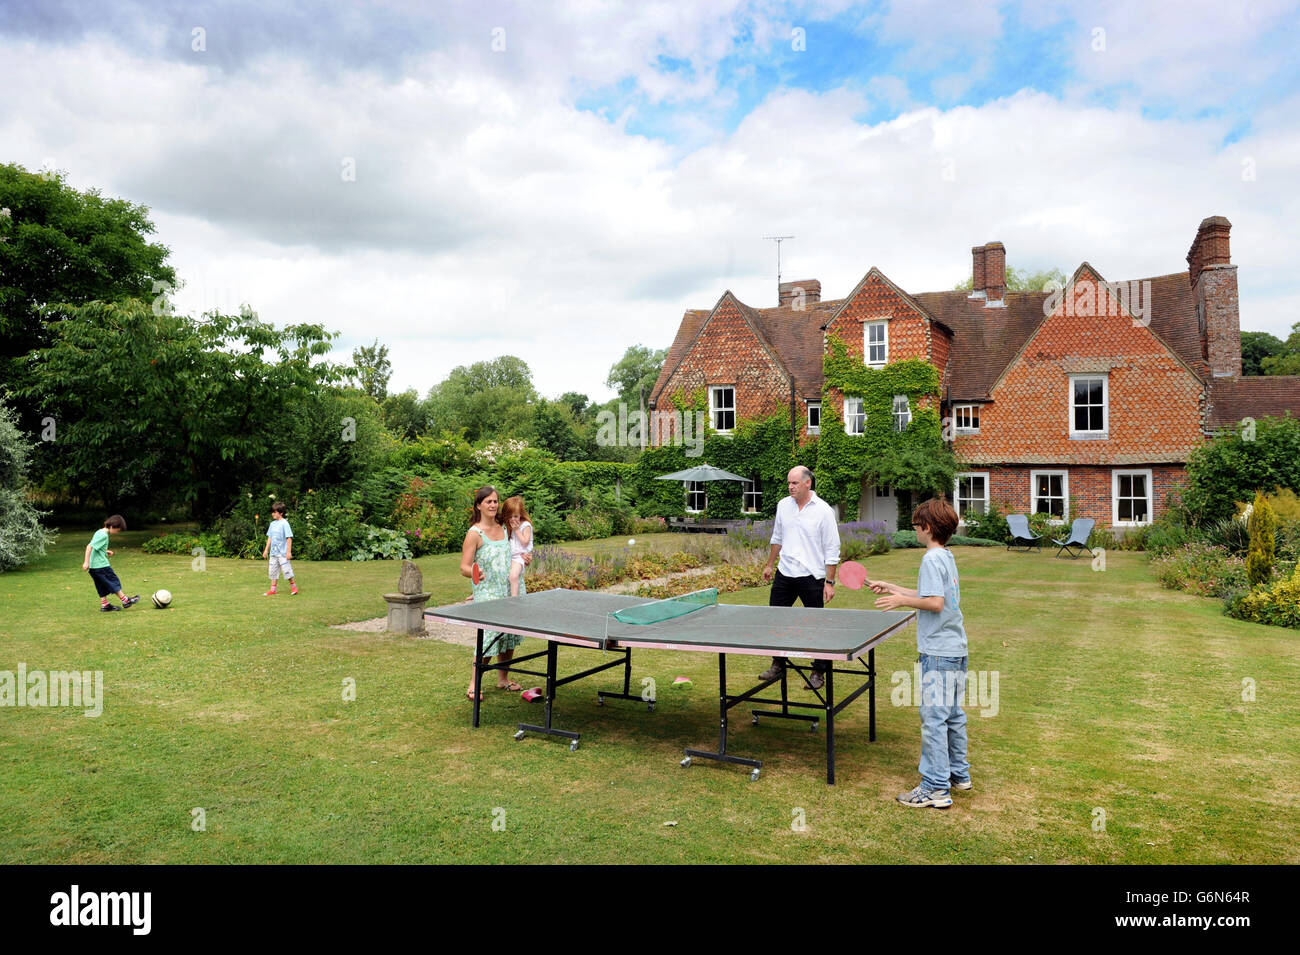 A family playing table tennis in the garden UK Stock Photo